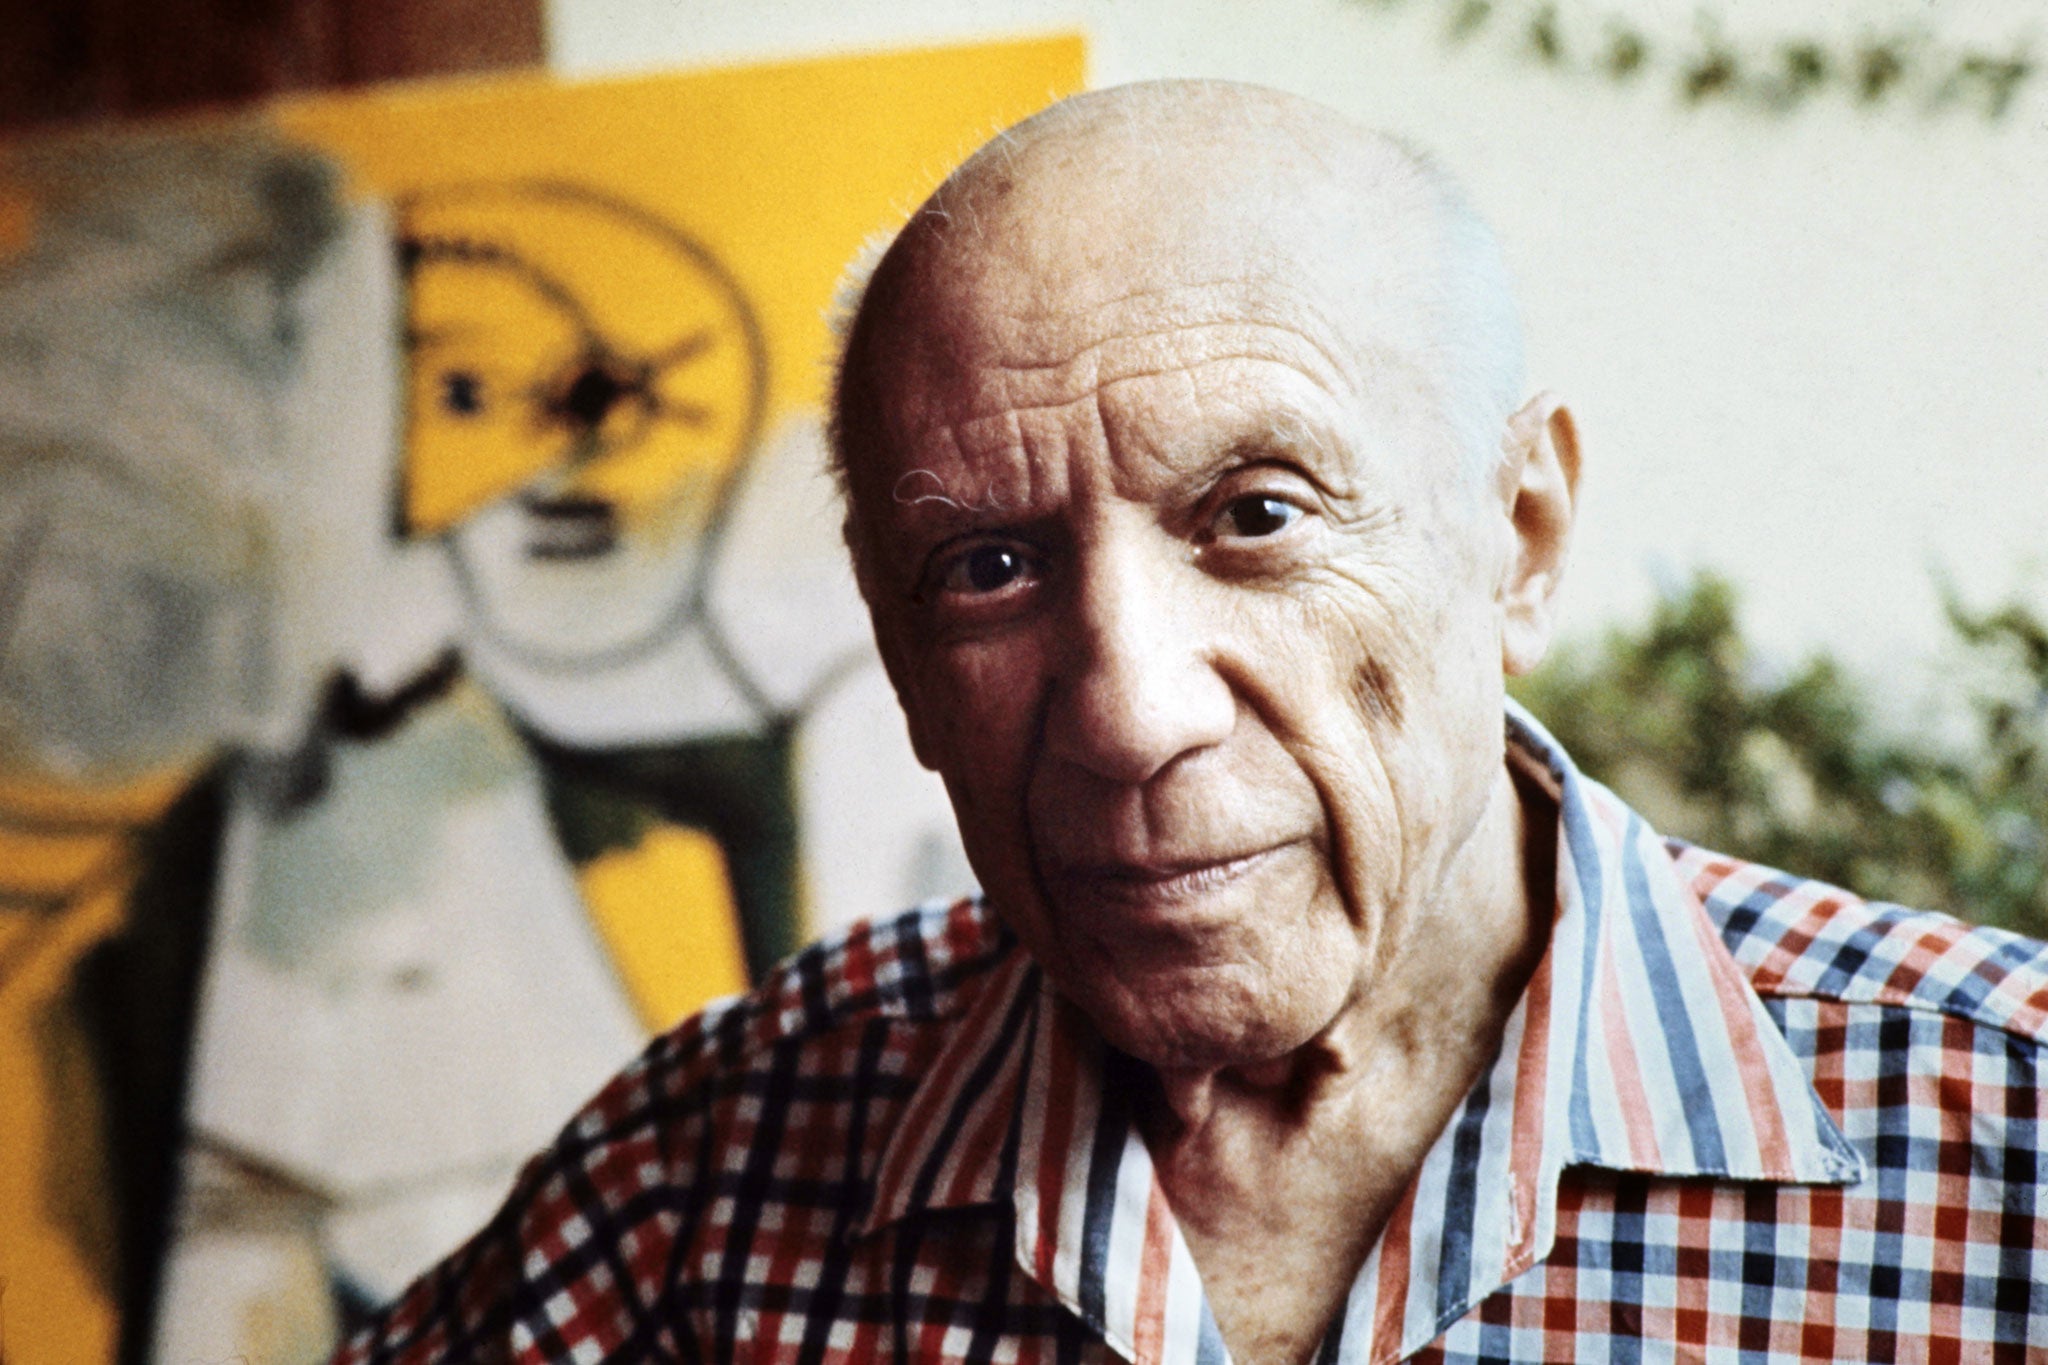 Pablo Picasso was commissioned along with Cocteau, Dalí, Warhol, Haring and Kandinsky to design labels for which product?